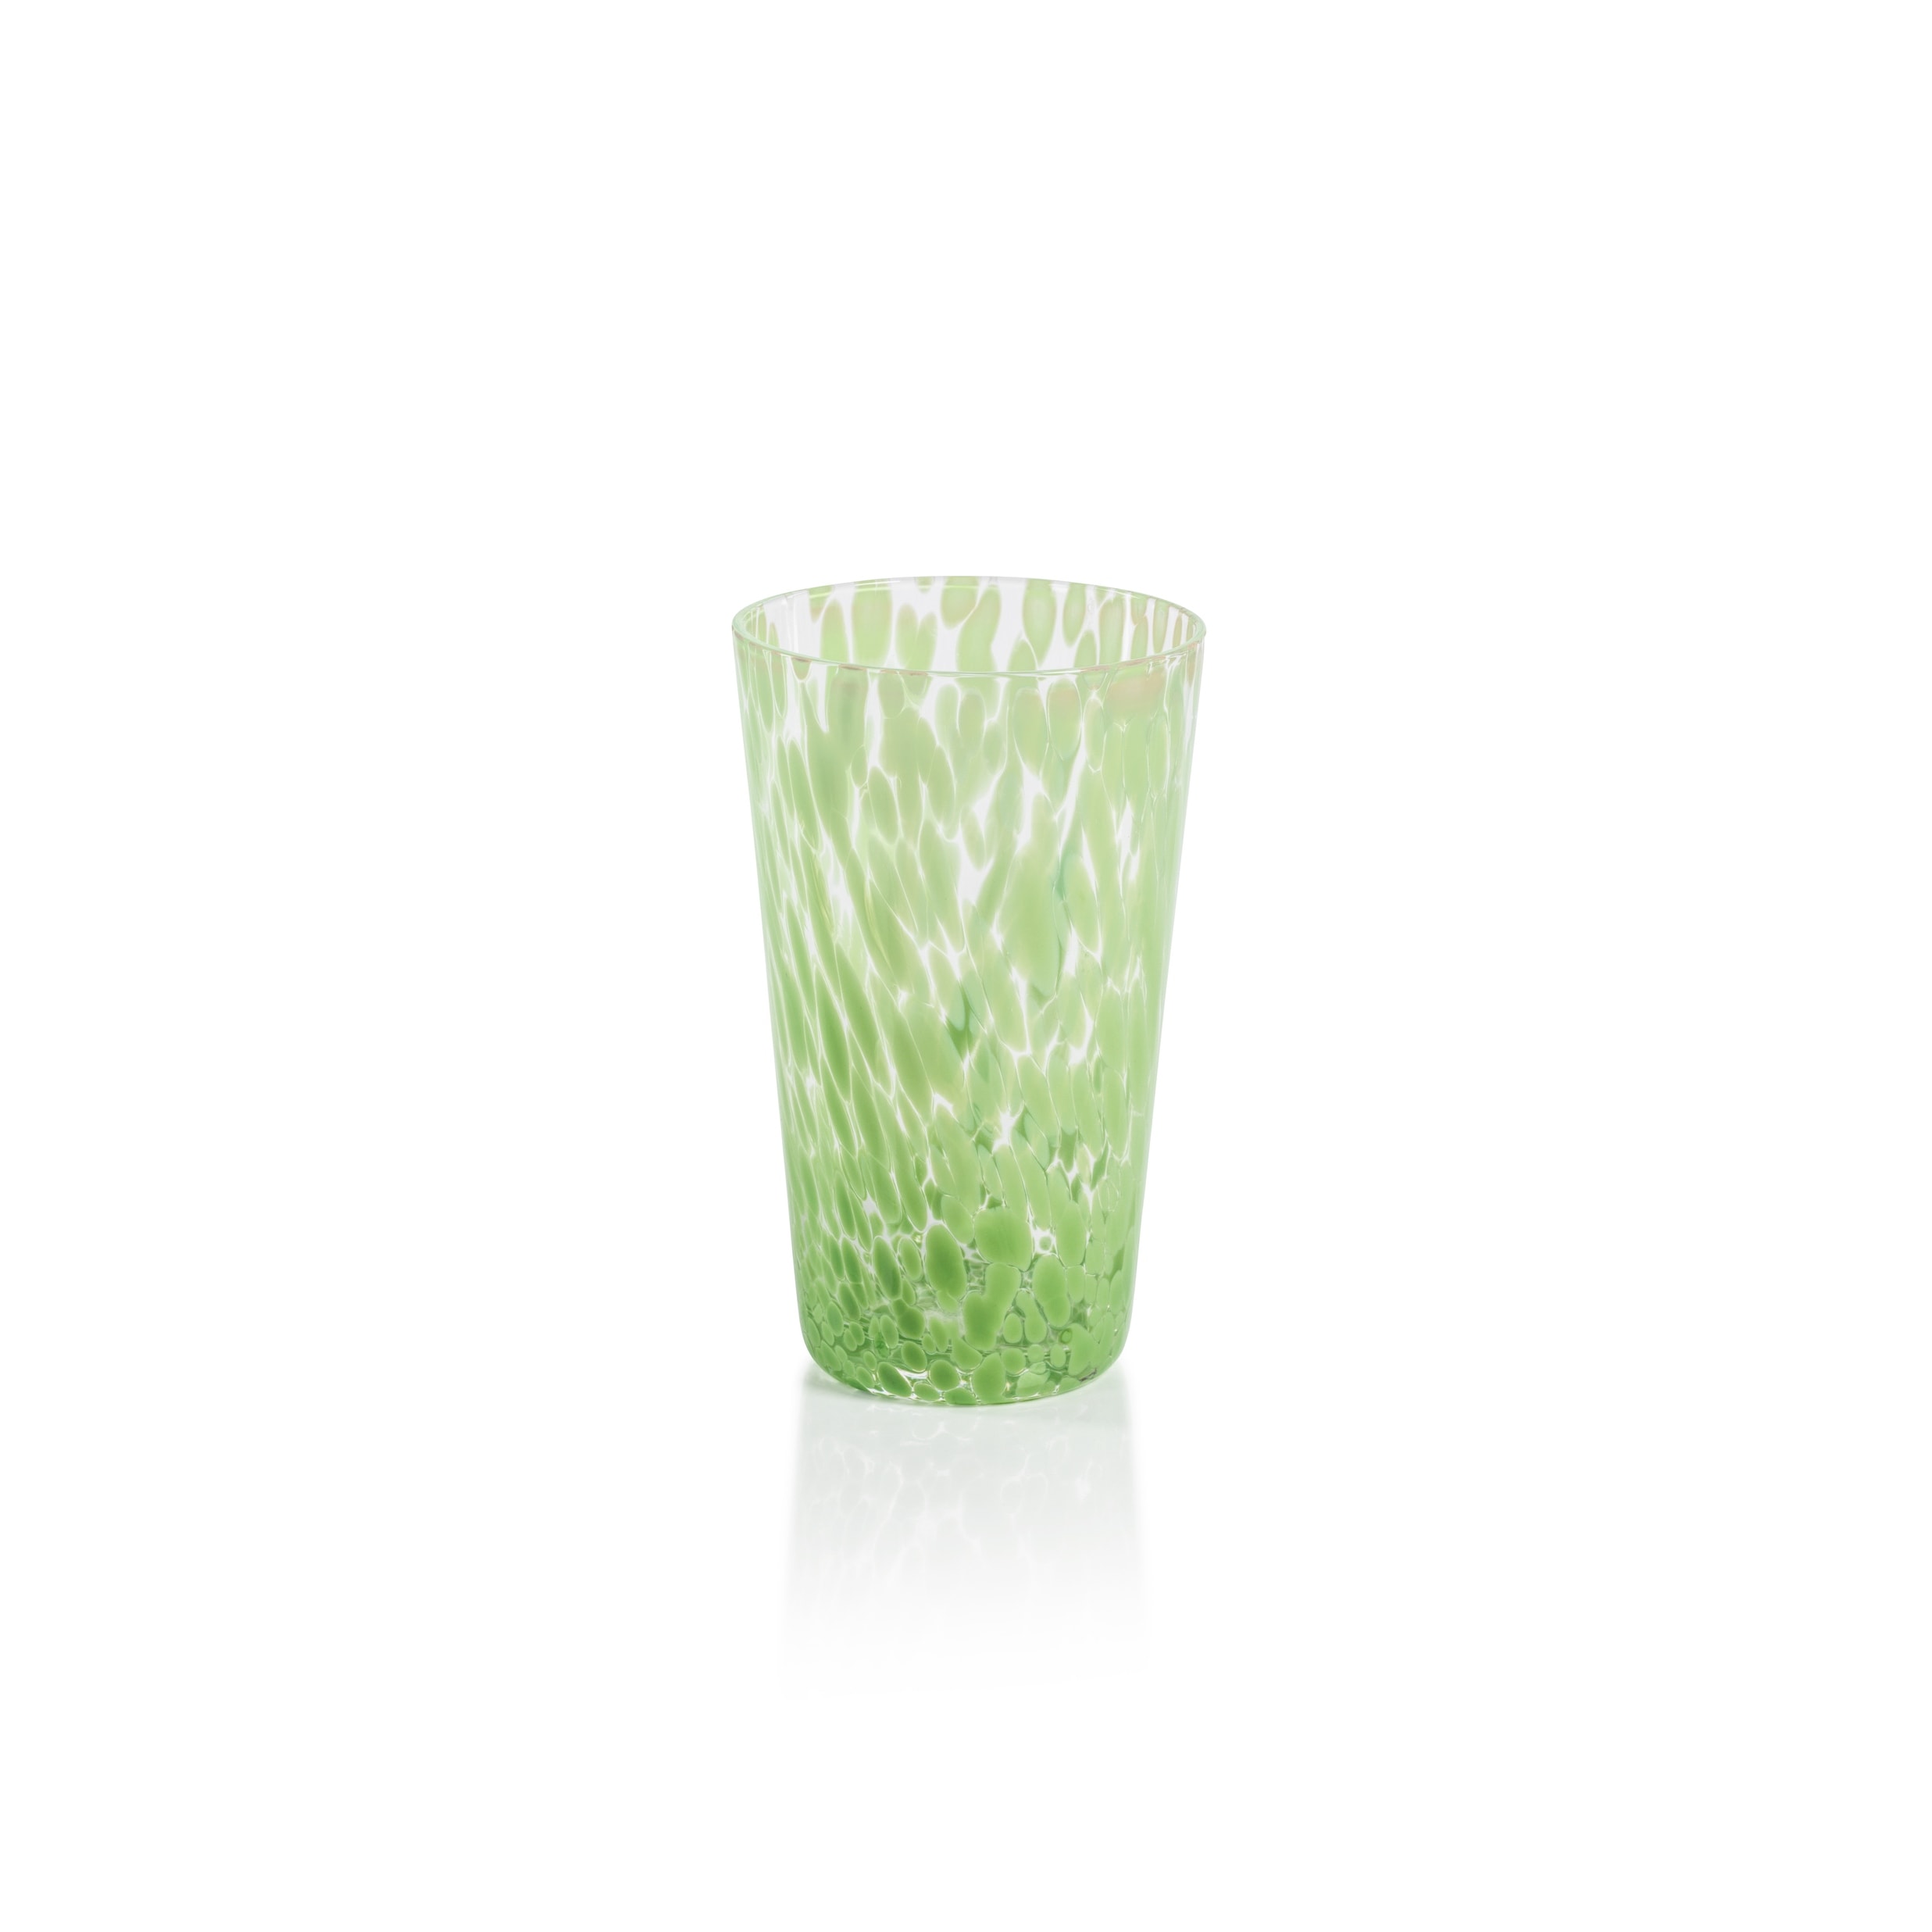 https://ak1.ostkcdn.com/images/products/is/images/direct/08c25255fc986440a783590279dab502961d9848/Willa-Speckled-Highball-Glasses%2C-Set-of-6.jpg